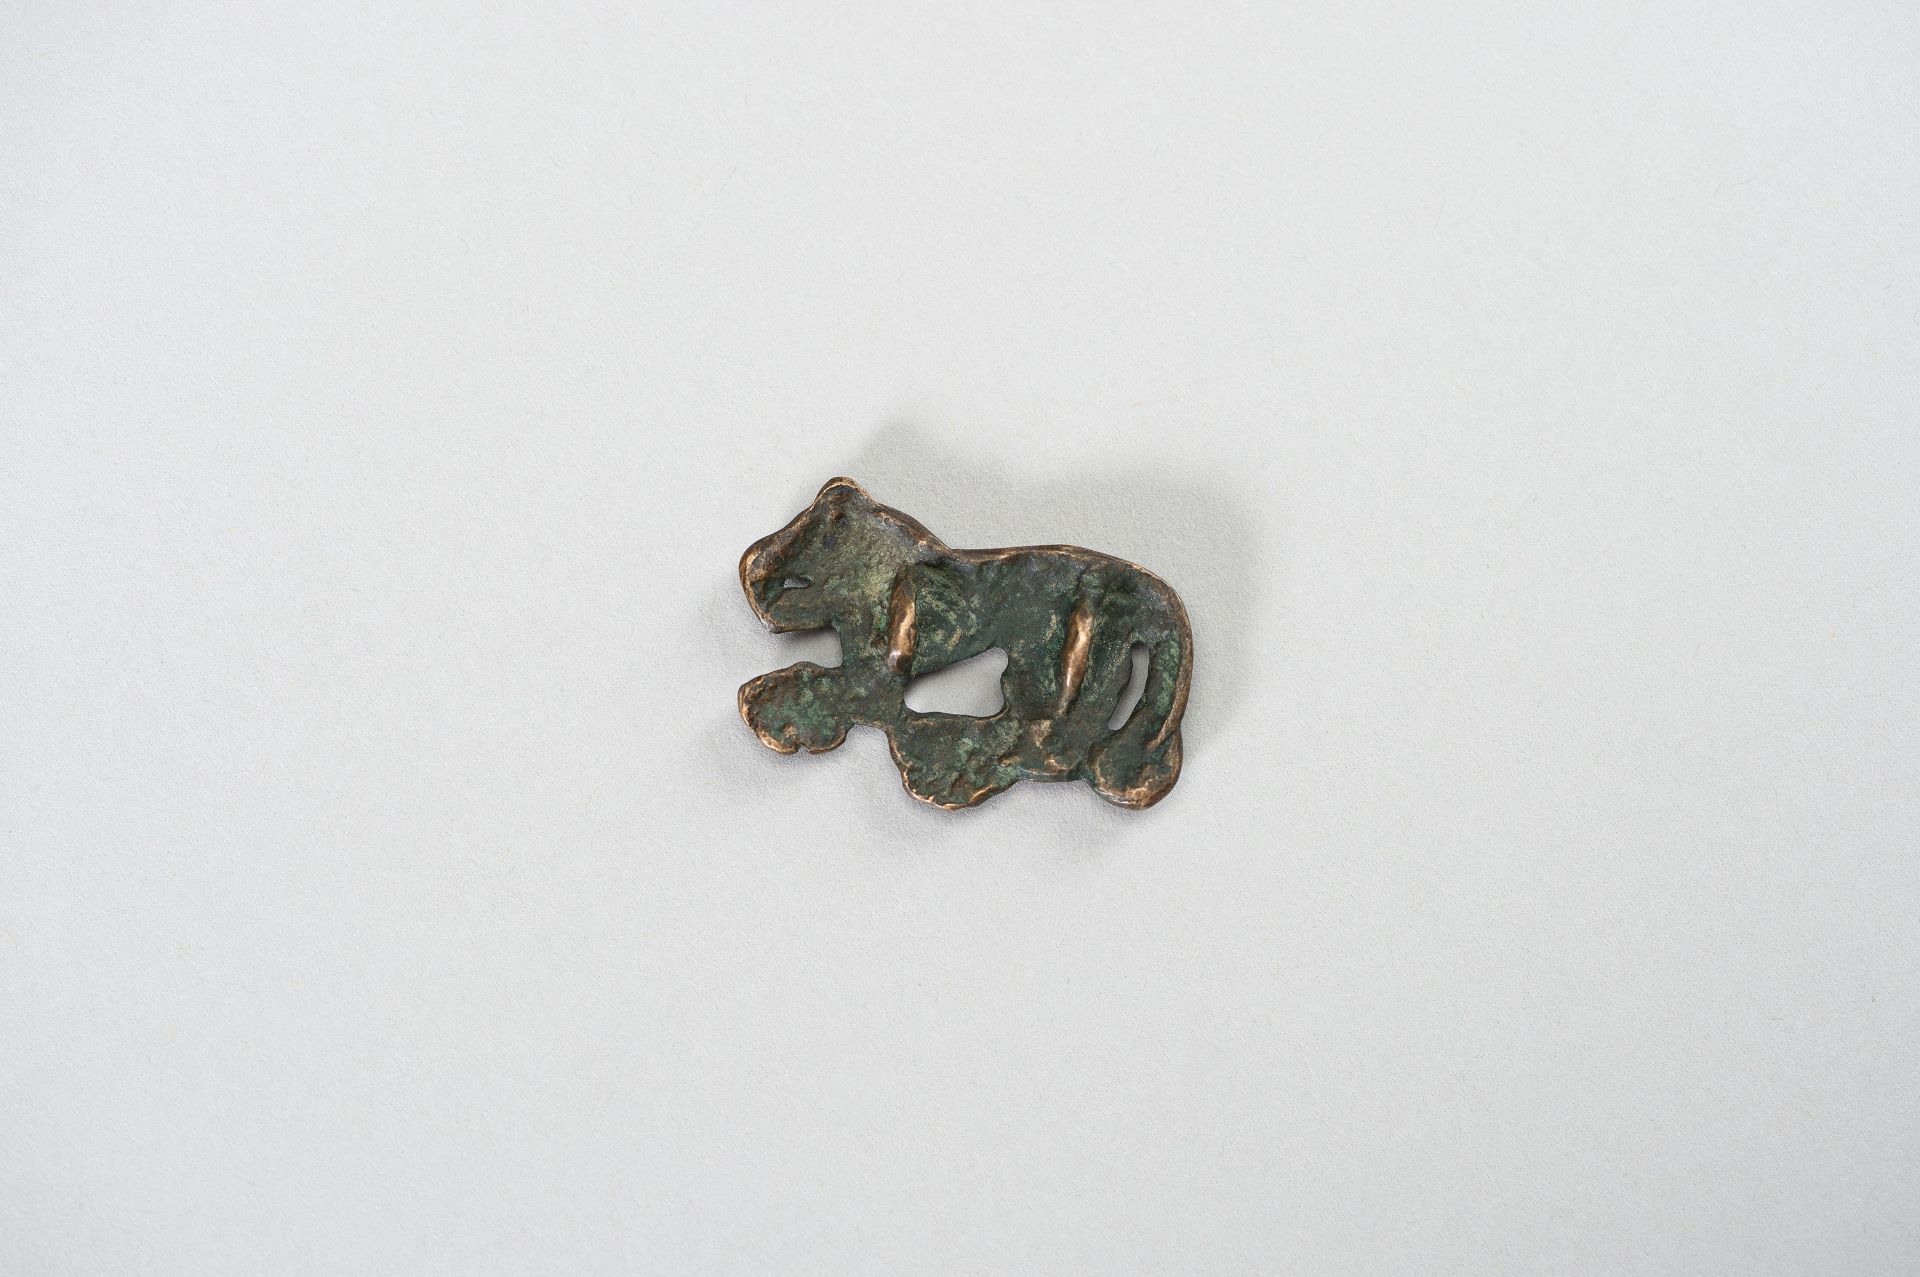 AN ORDOS BRONZE 'CROUCHING TIGER' PLAQUE, WARRING STATES - Image 2 of 3